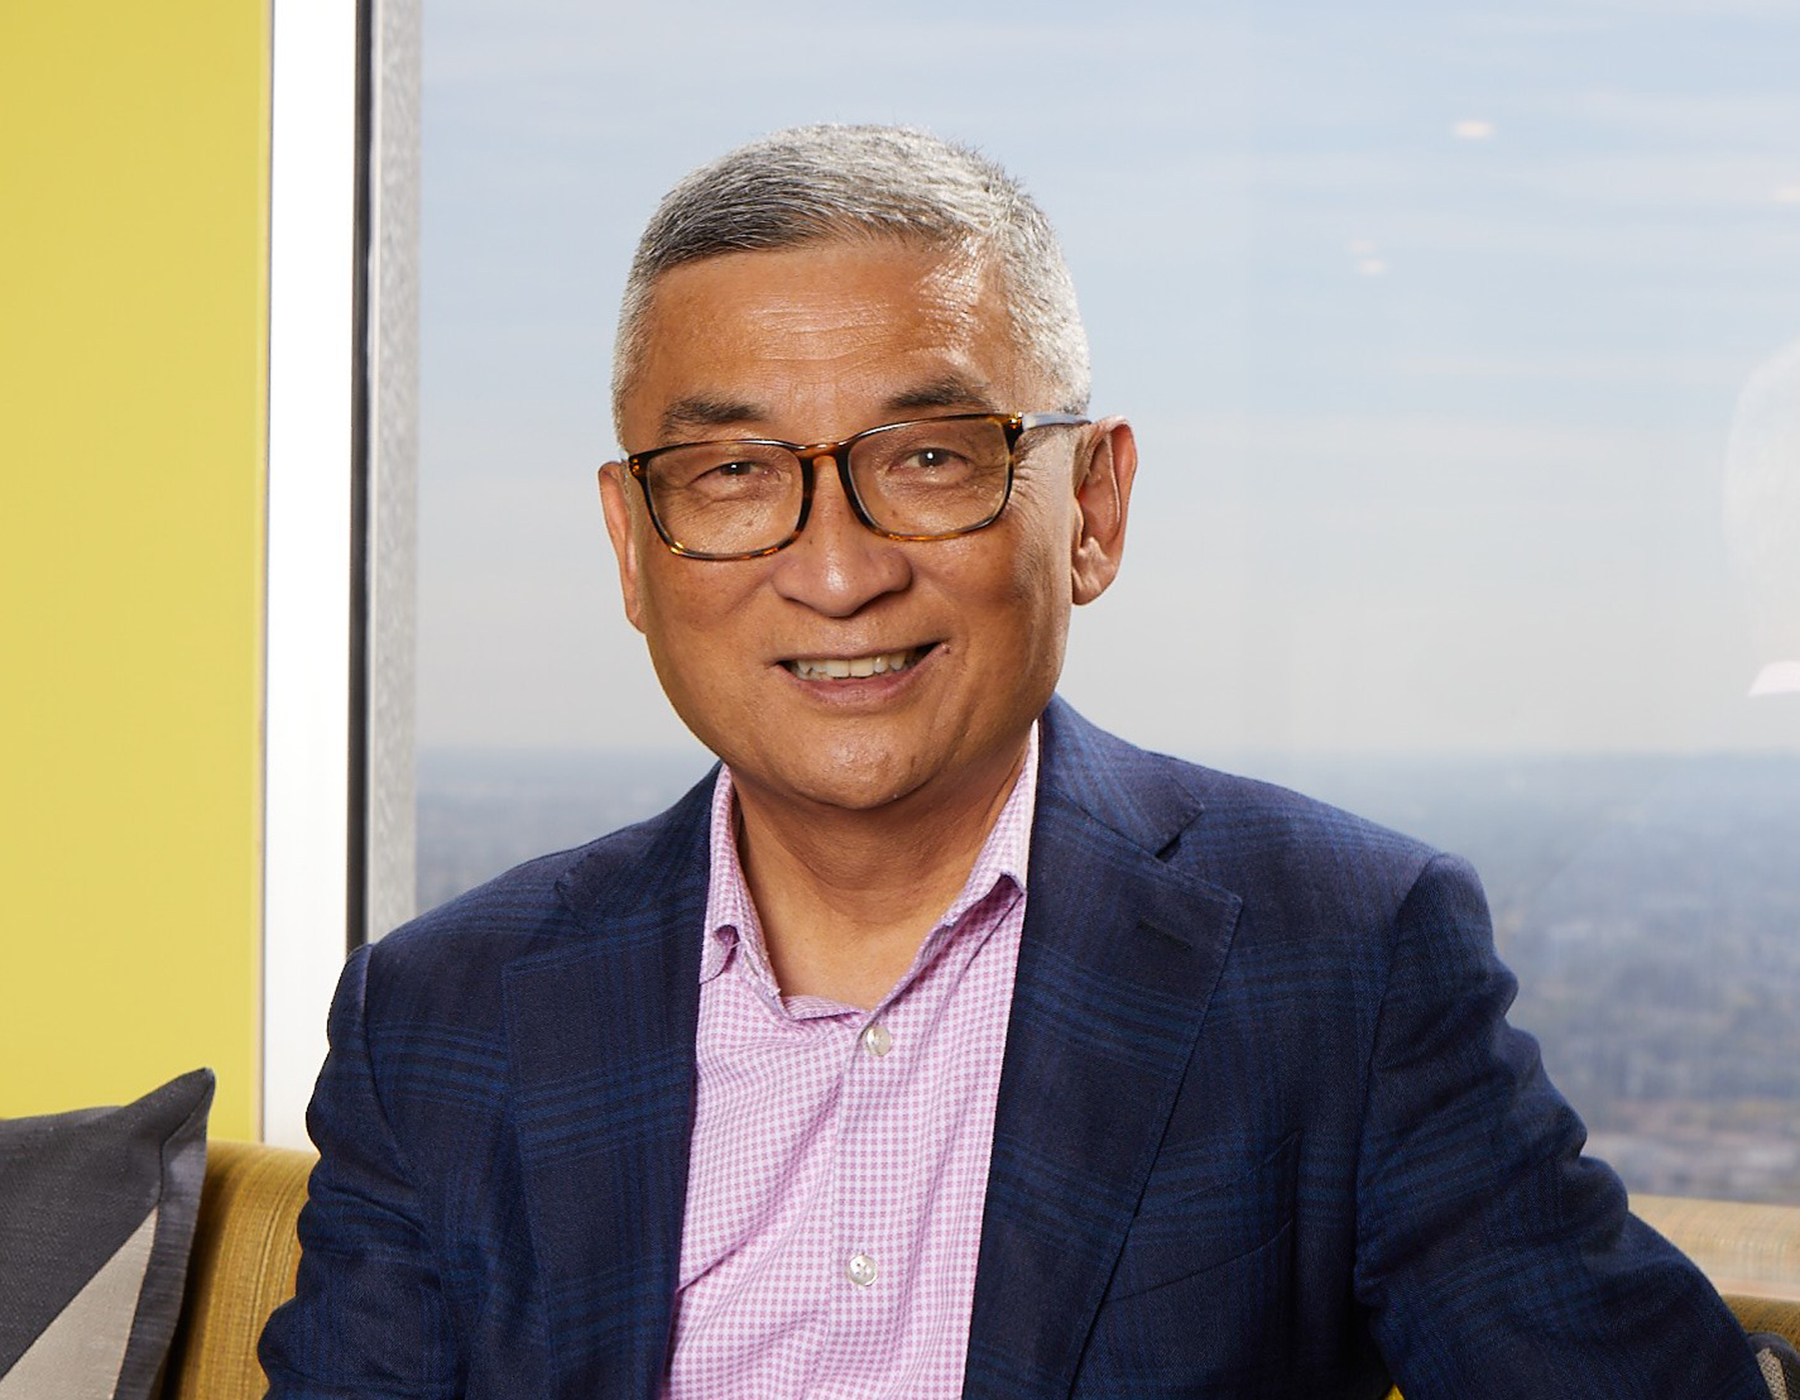 Founder of IW Group Bill Imada Joins AAF Hall of Fame IPG